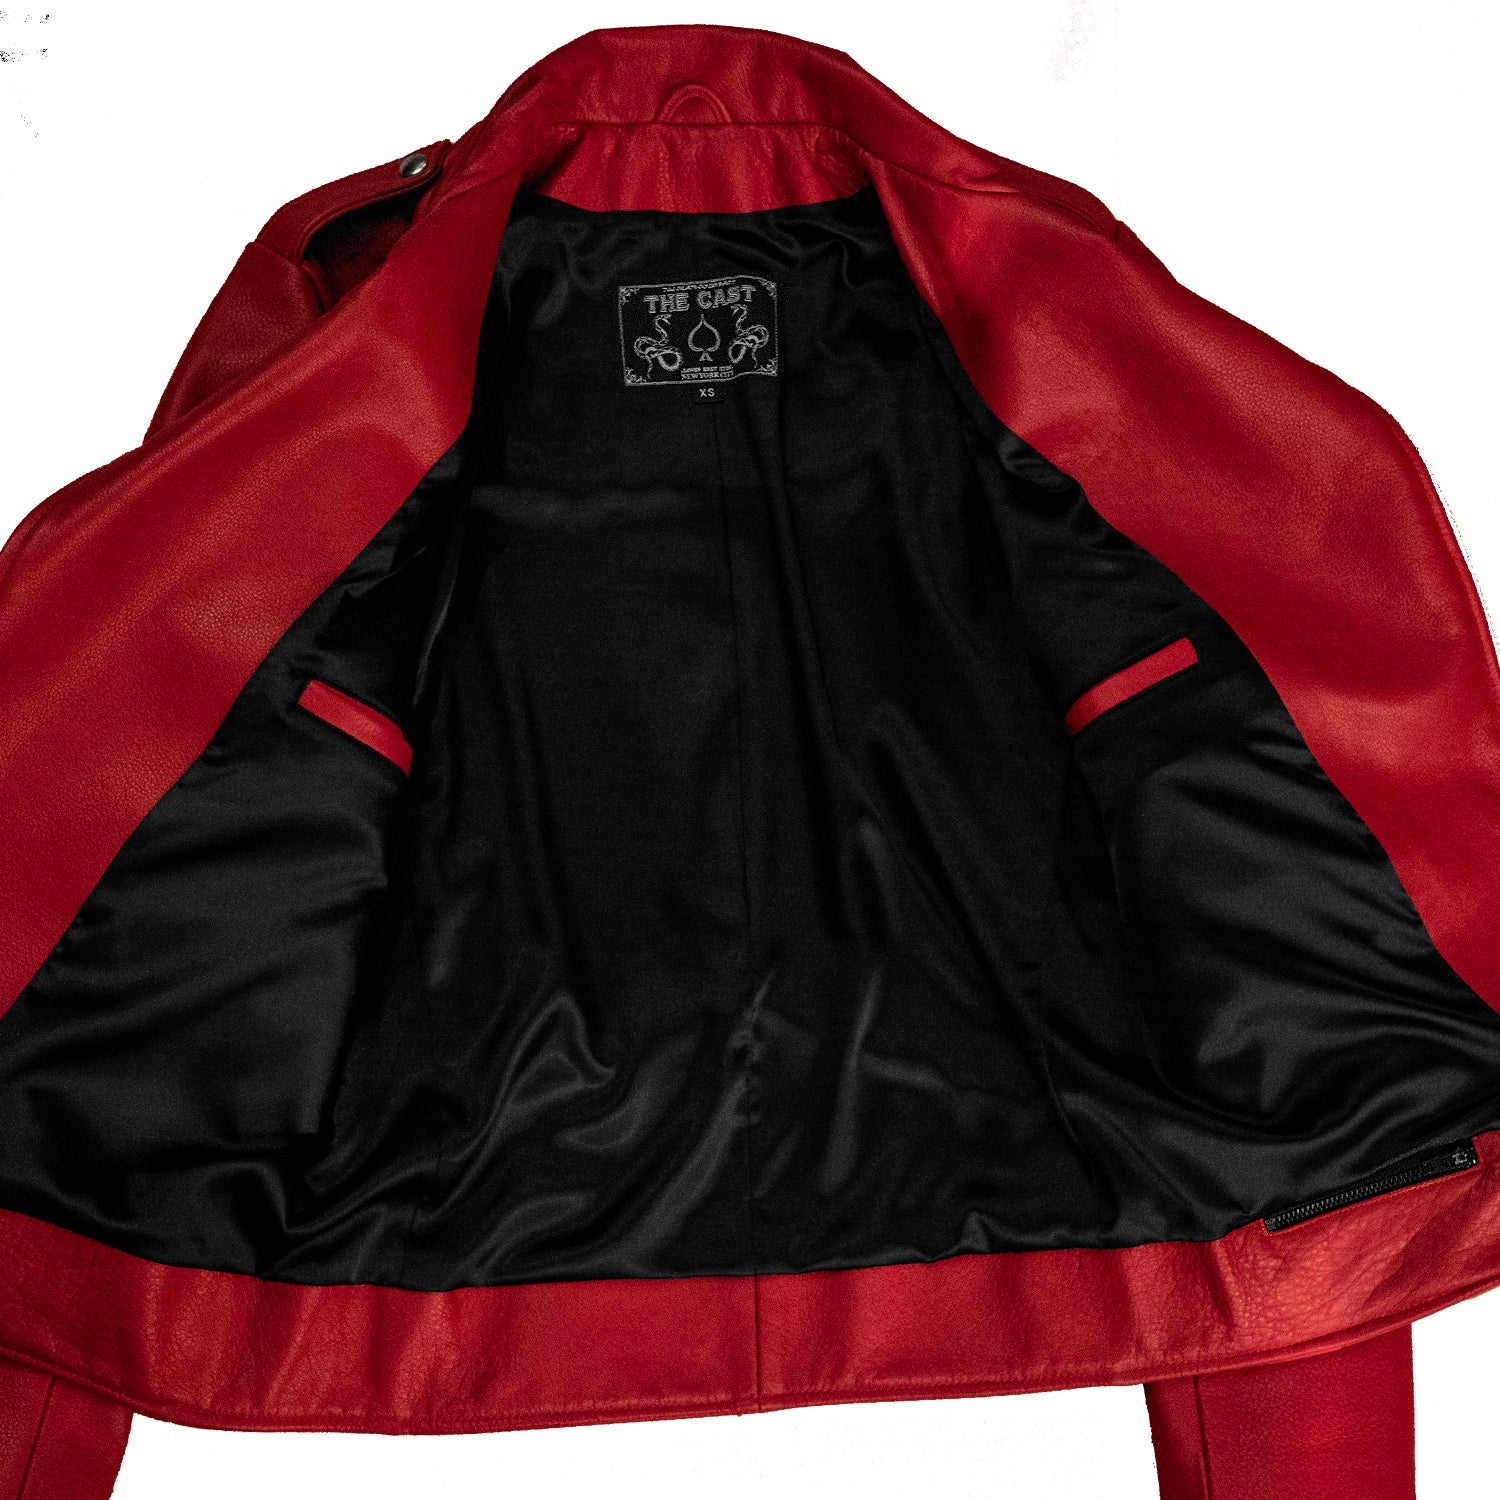 BOWERY JACKET - Red